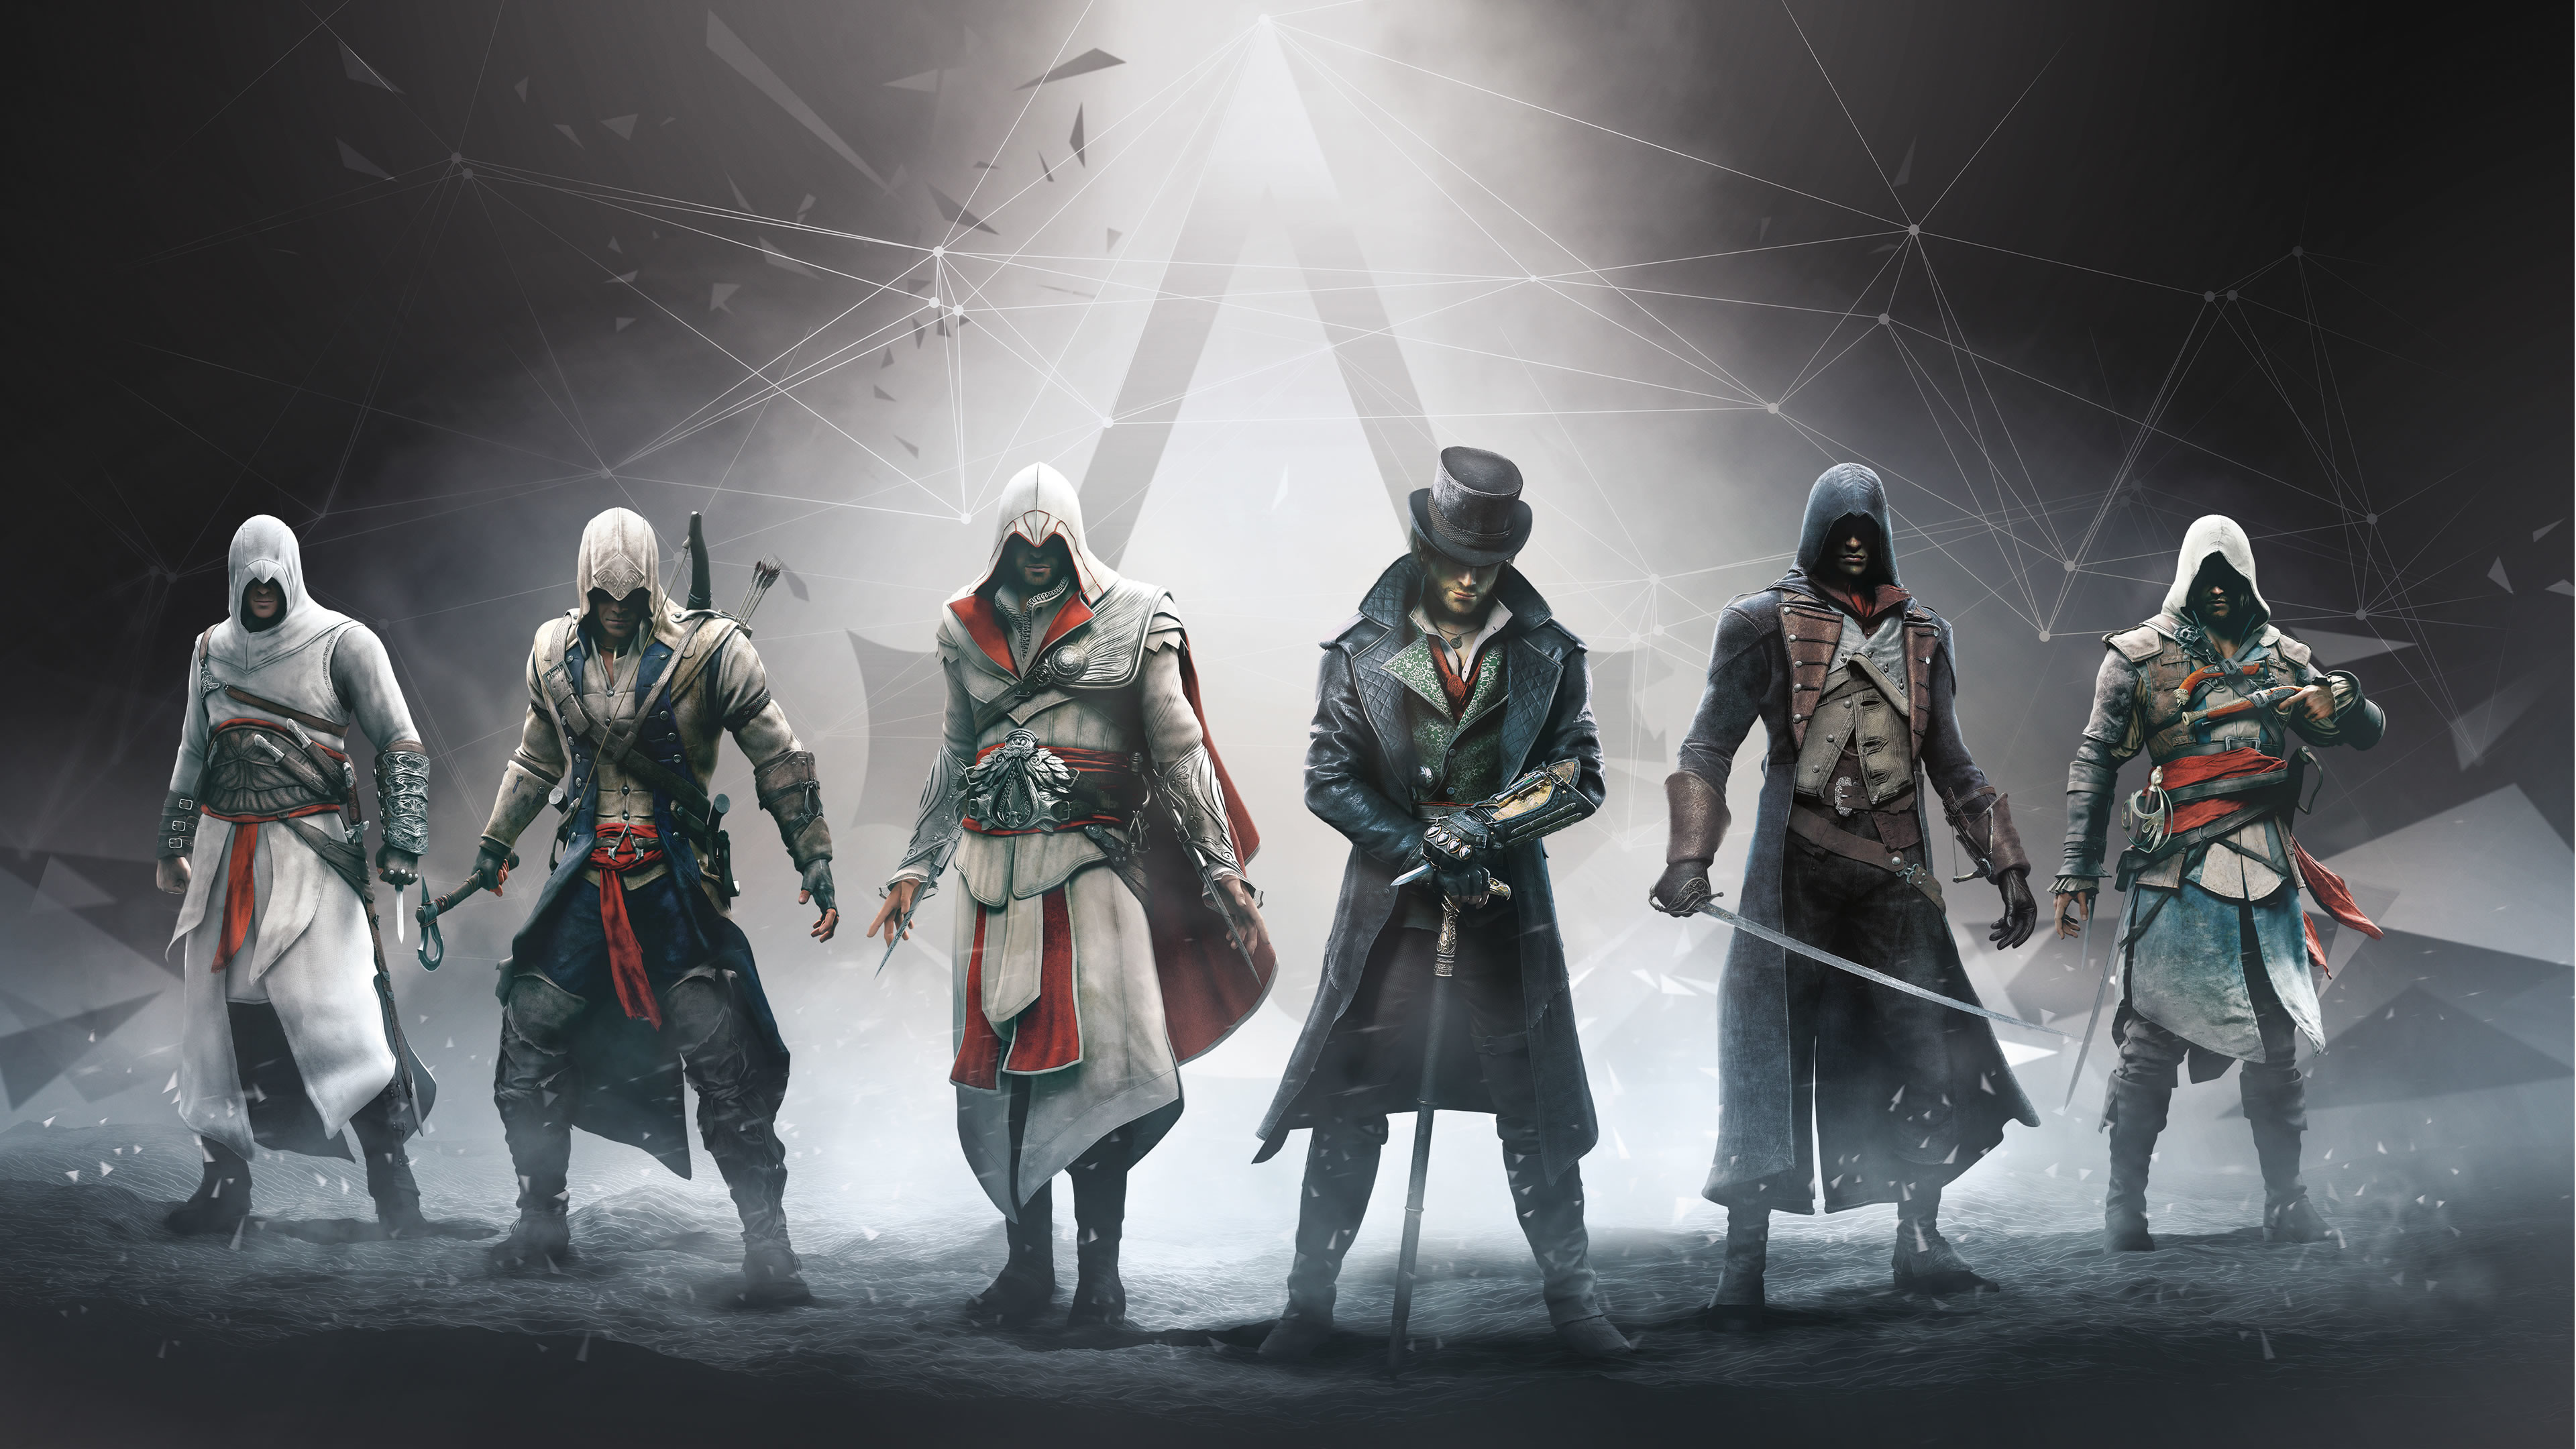 3840x2160 19 Altair (Assassin's Creed) HD Wallpapers | HintergrÃ¼nde - Wallpaper Abyss